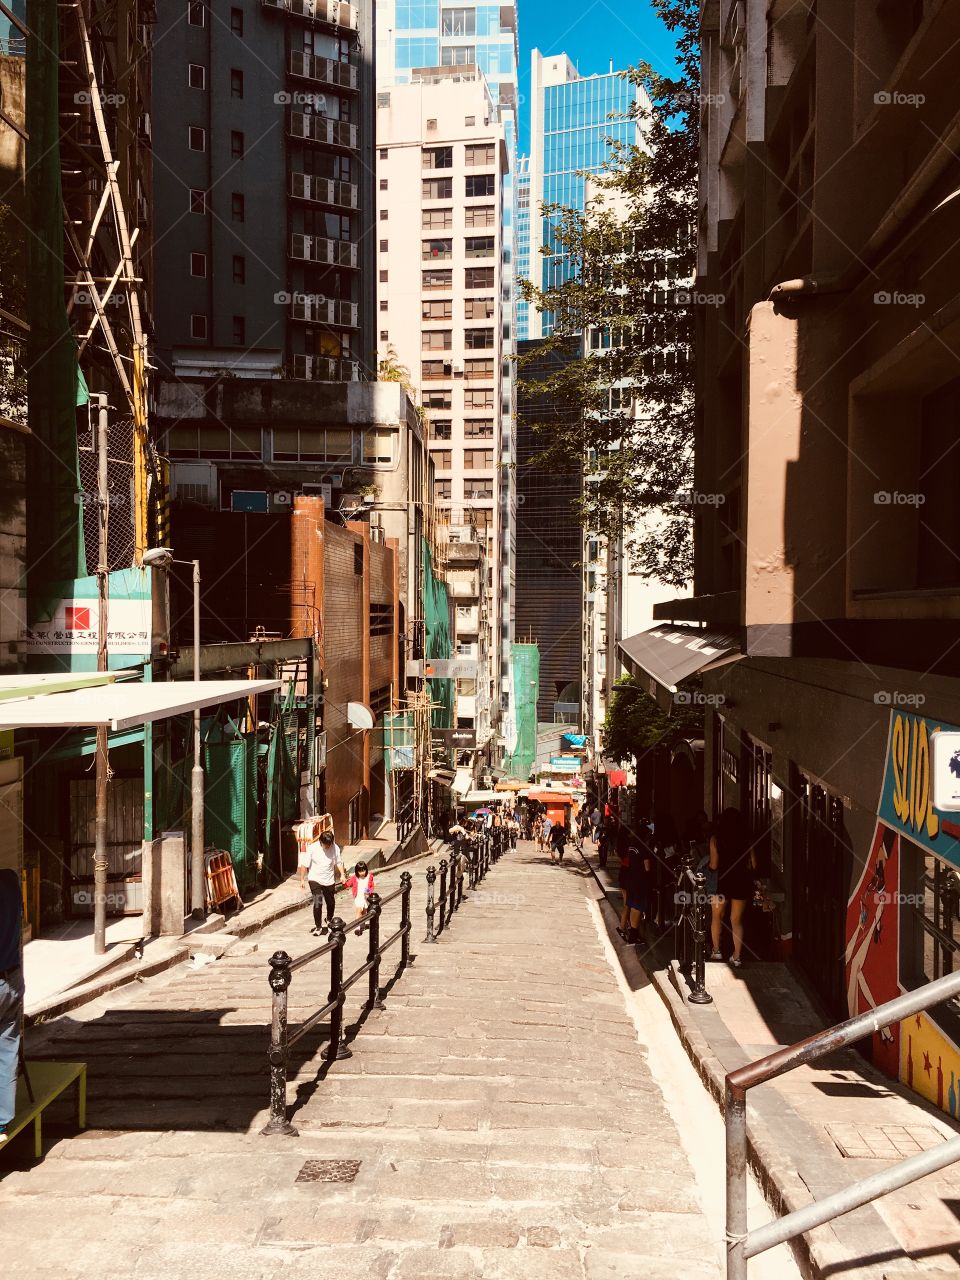 Streets of Hong Kong. Amazing place filled w wealth, business, luxury, and modernization, but also holding on tight to history, culture, and grit. 